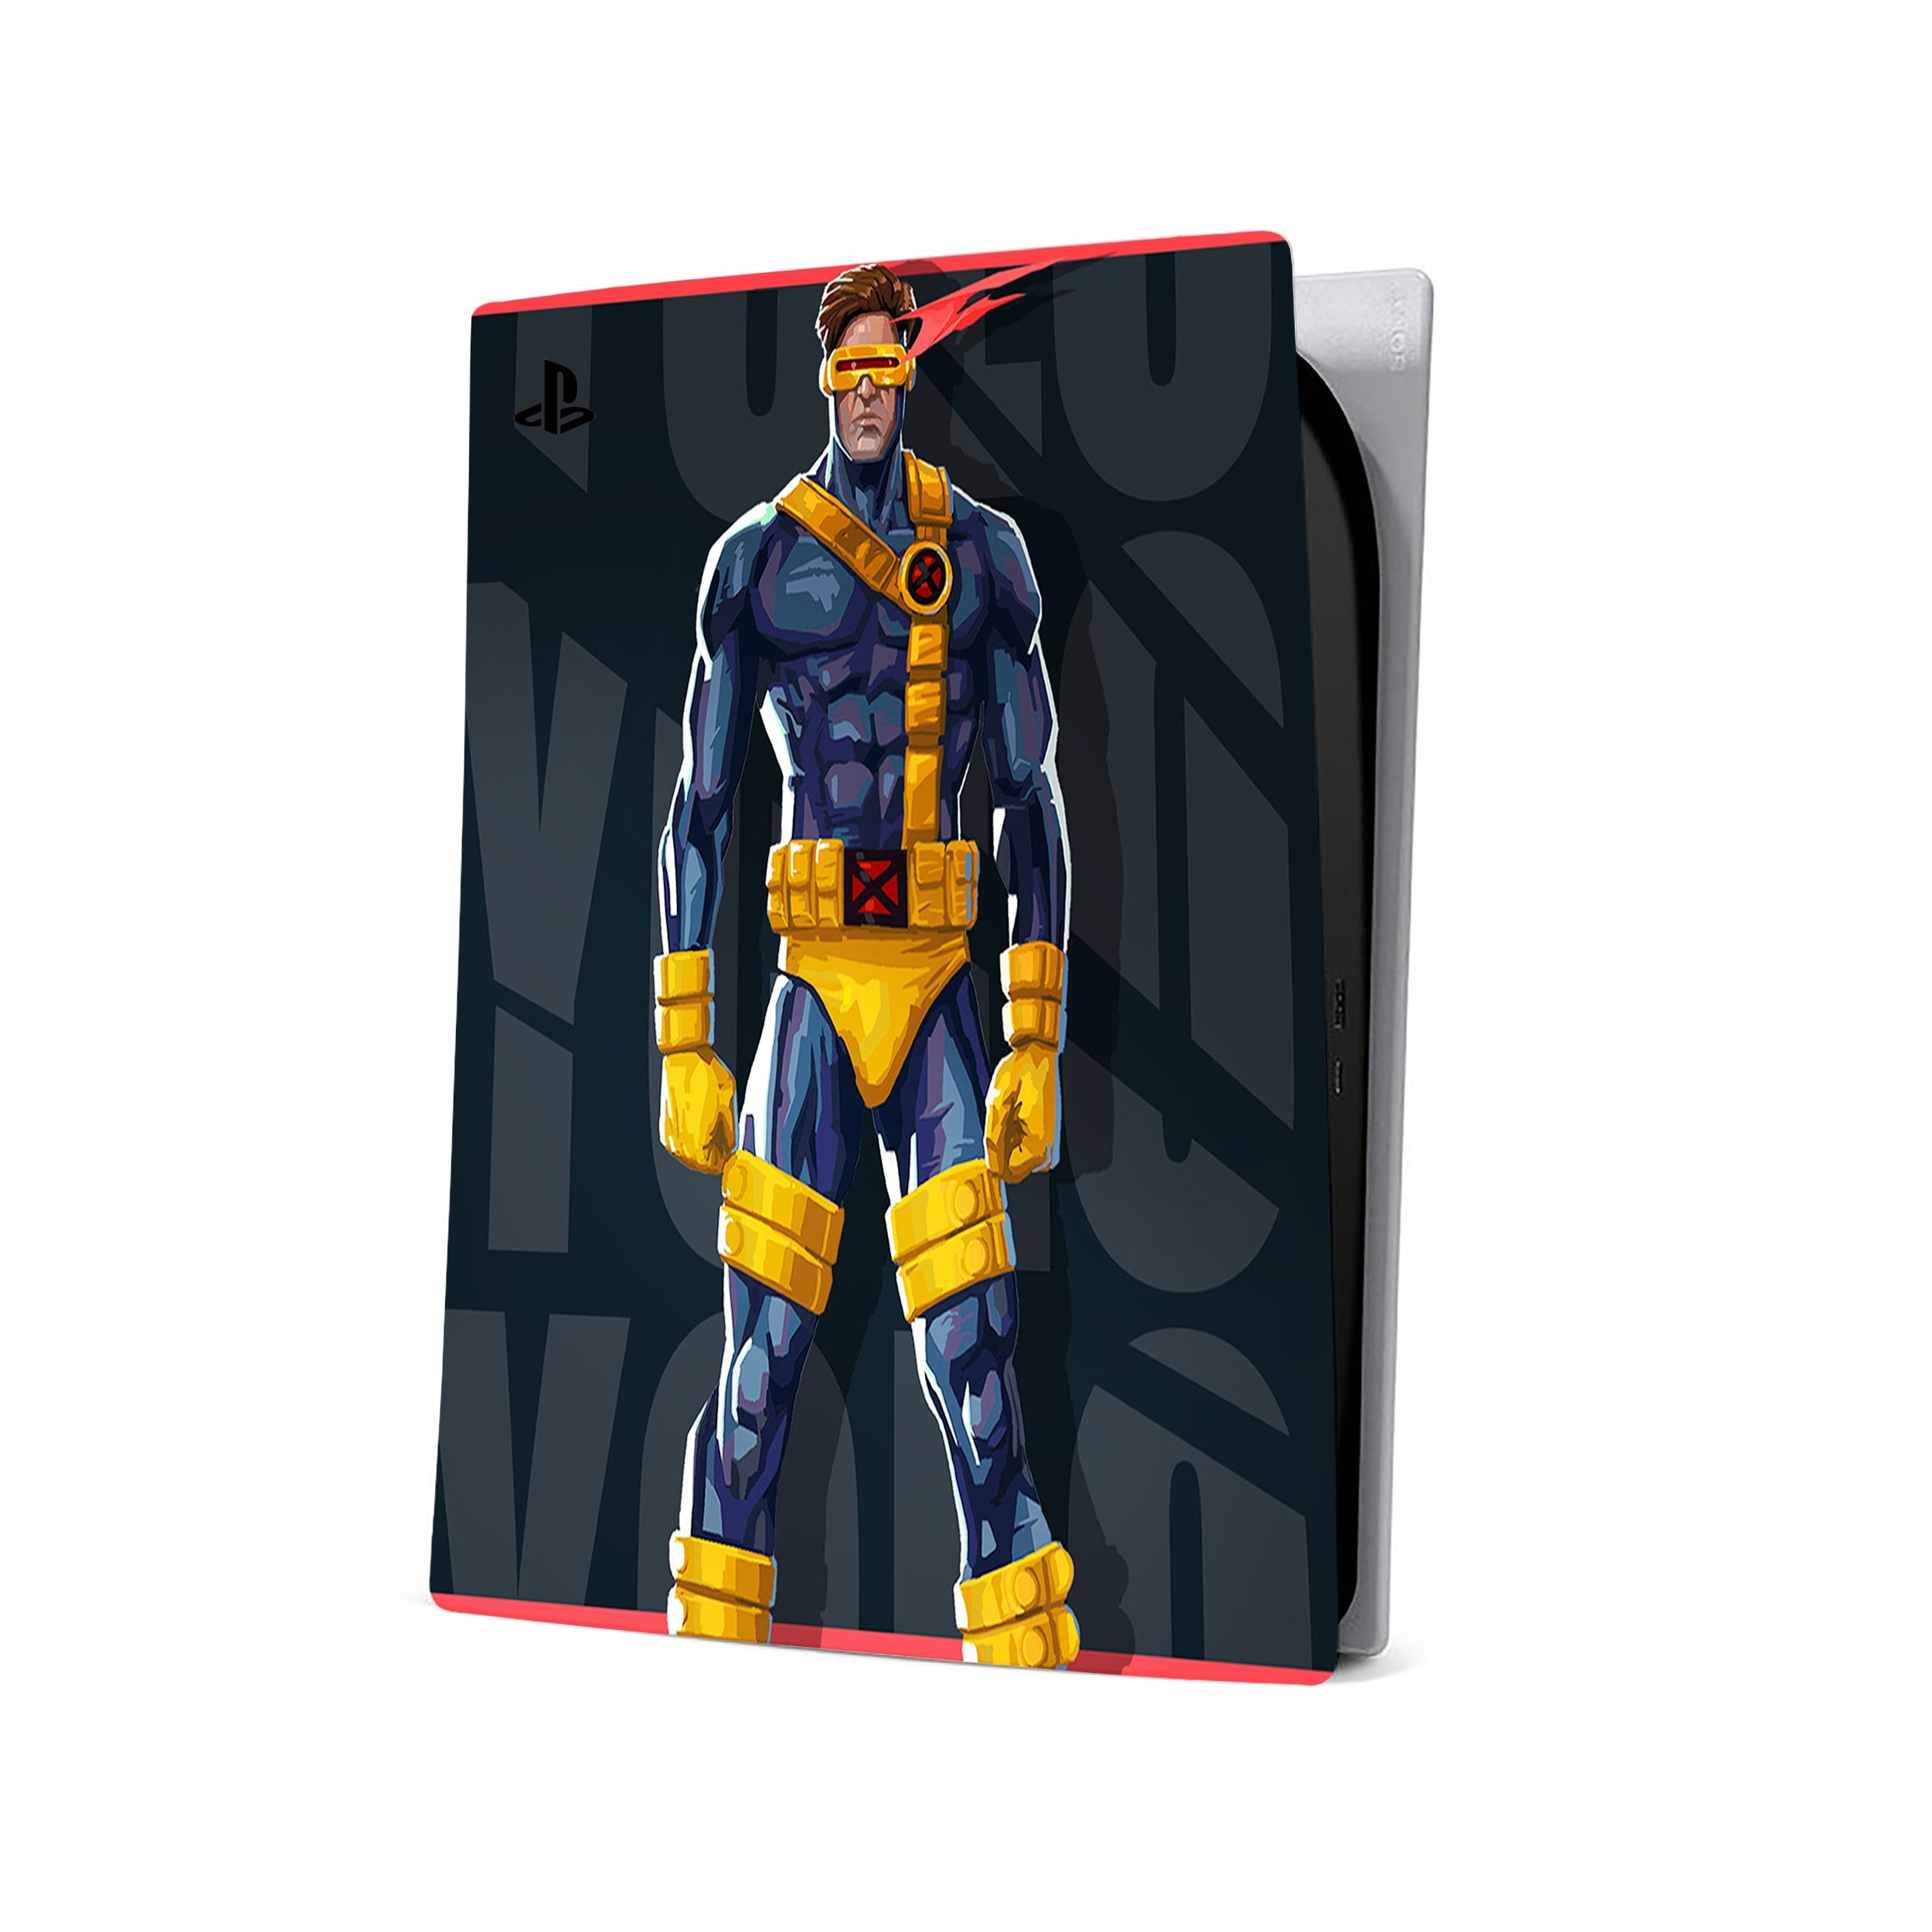 A video game skin featuring a Marvel Comics X Men Cyclops design for the PS5.